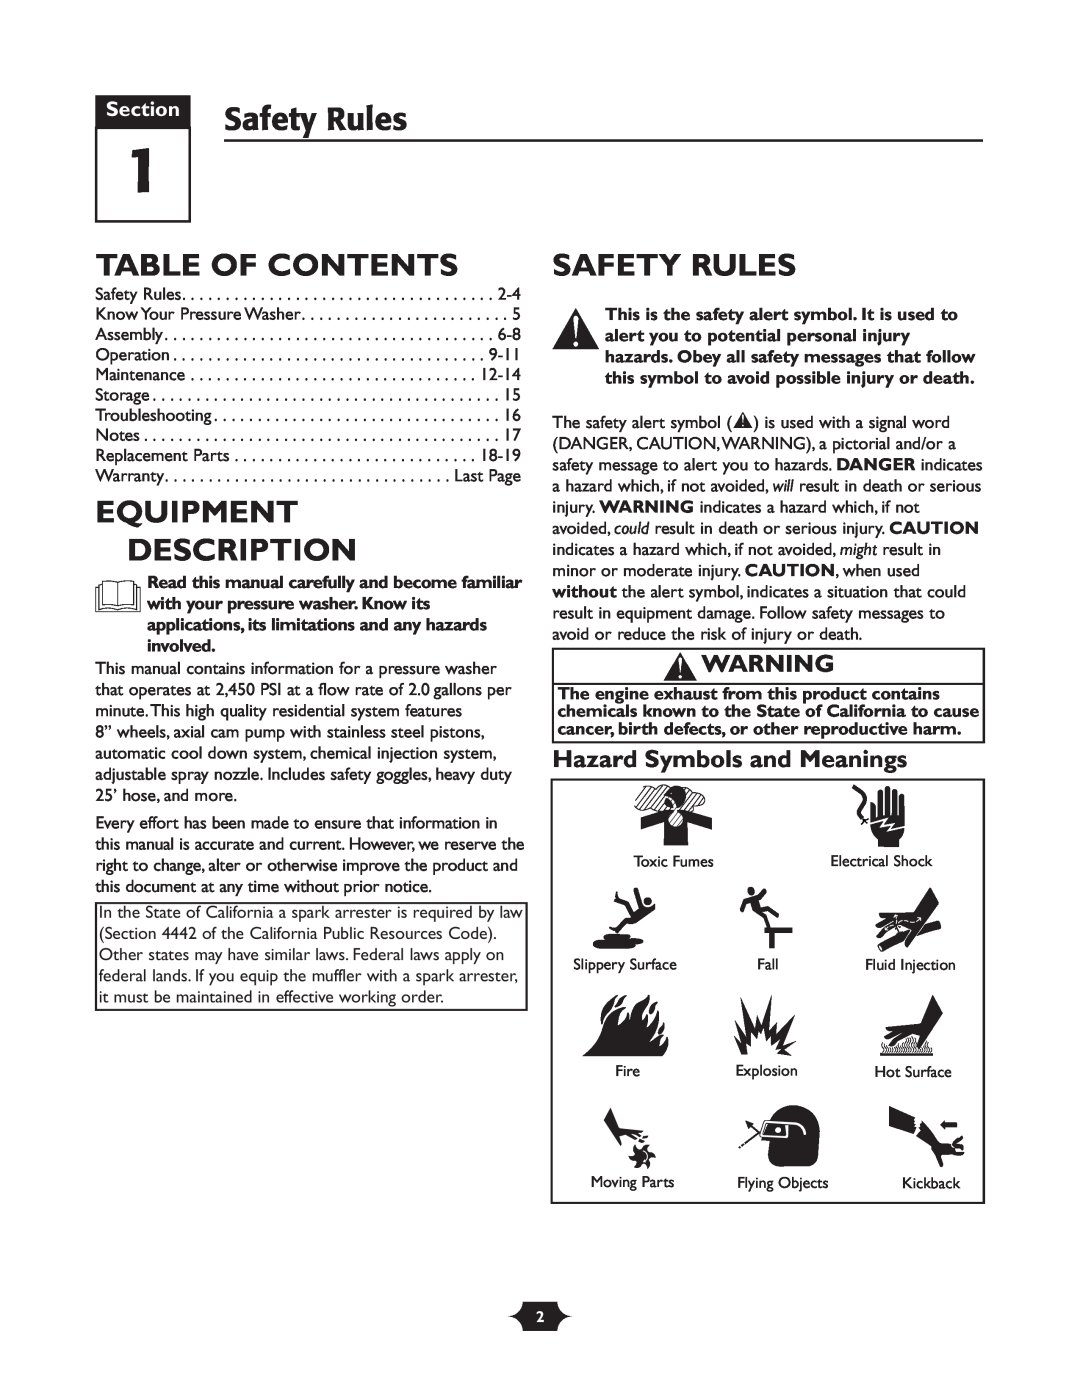 Troy-Bilt 20207 manual Safety Rules, Table Of Contents, Equipment Description, Hazard Symbols and Meanings, Section 